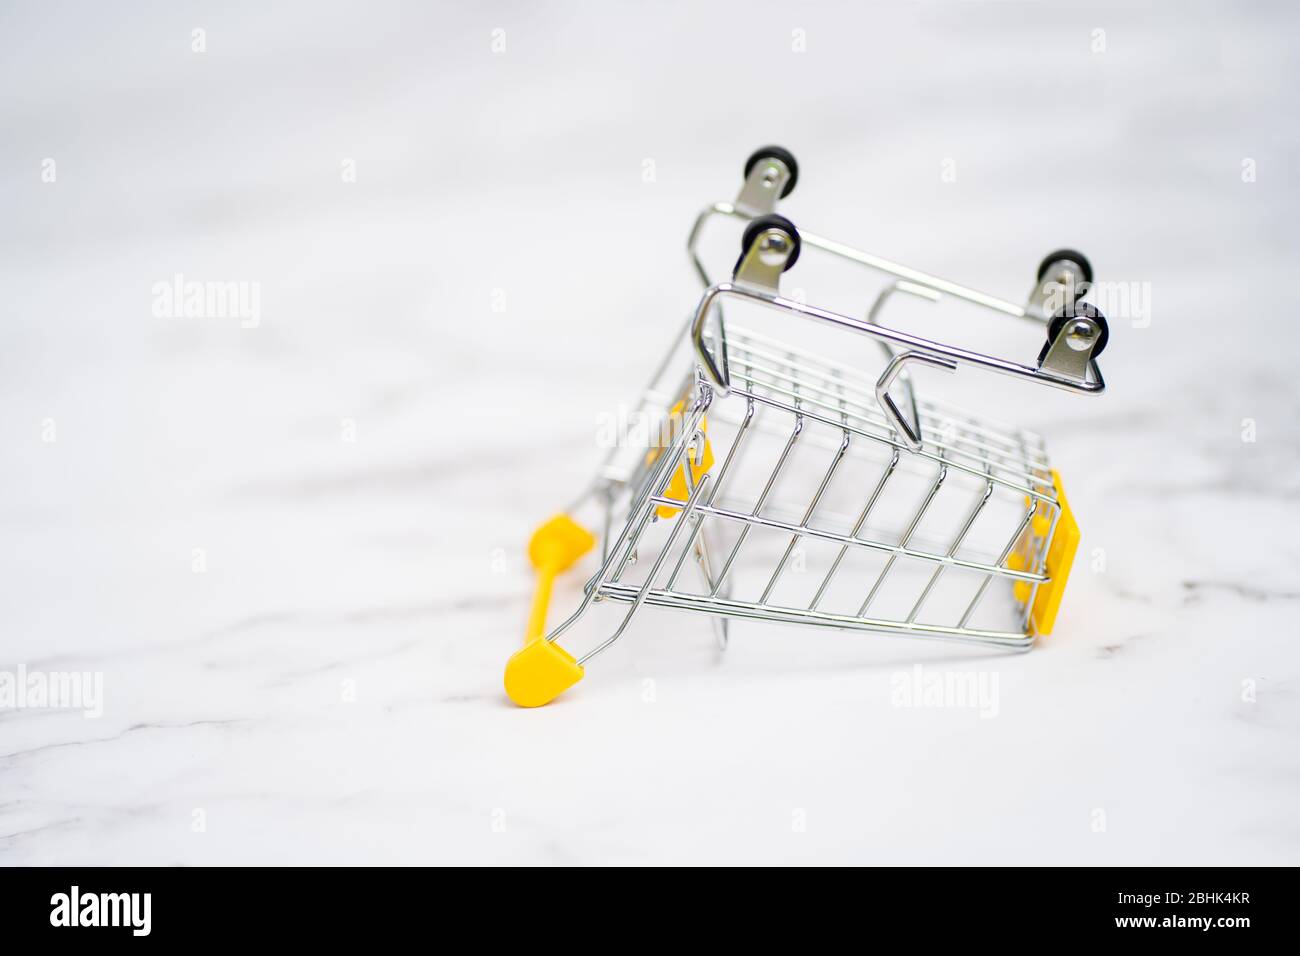 Empty inverted shopping cart on white marble background. Stainless steel shopping trolley upside down. Business, mall, market, shopping concept. Stock Photo